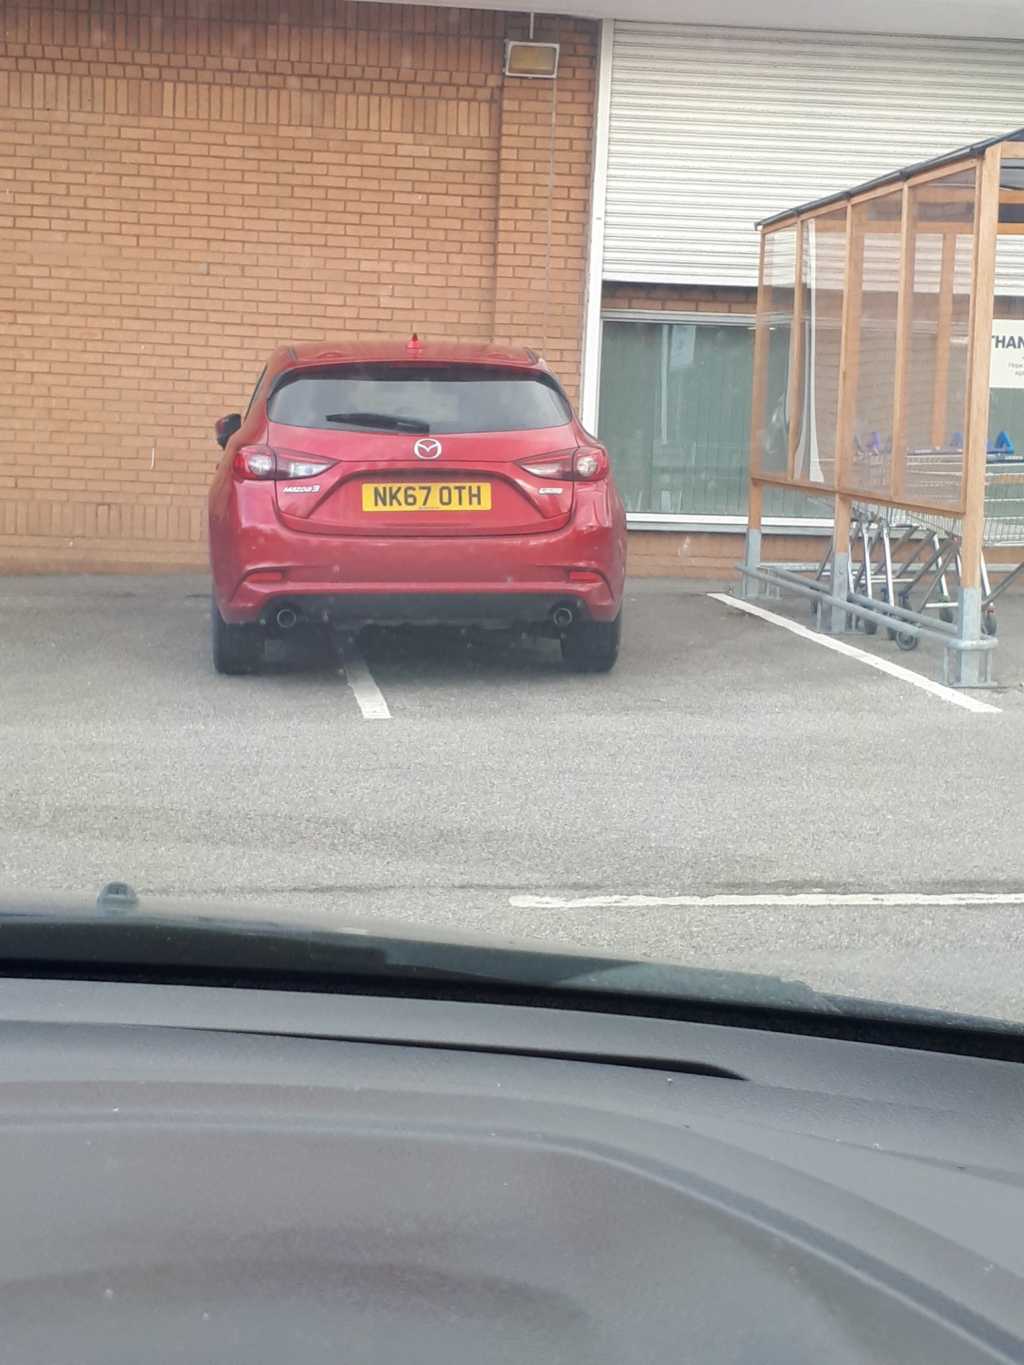 NK67 OTH displaying Inconsiderate Parking